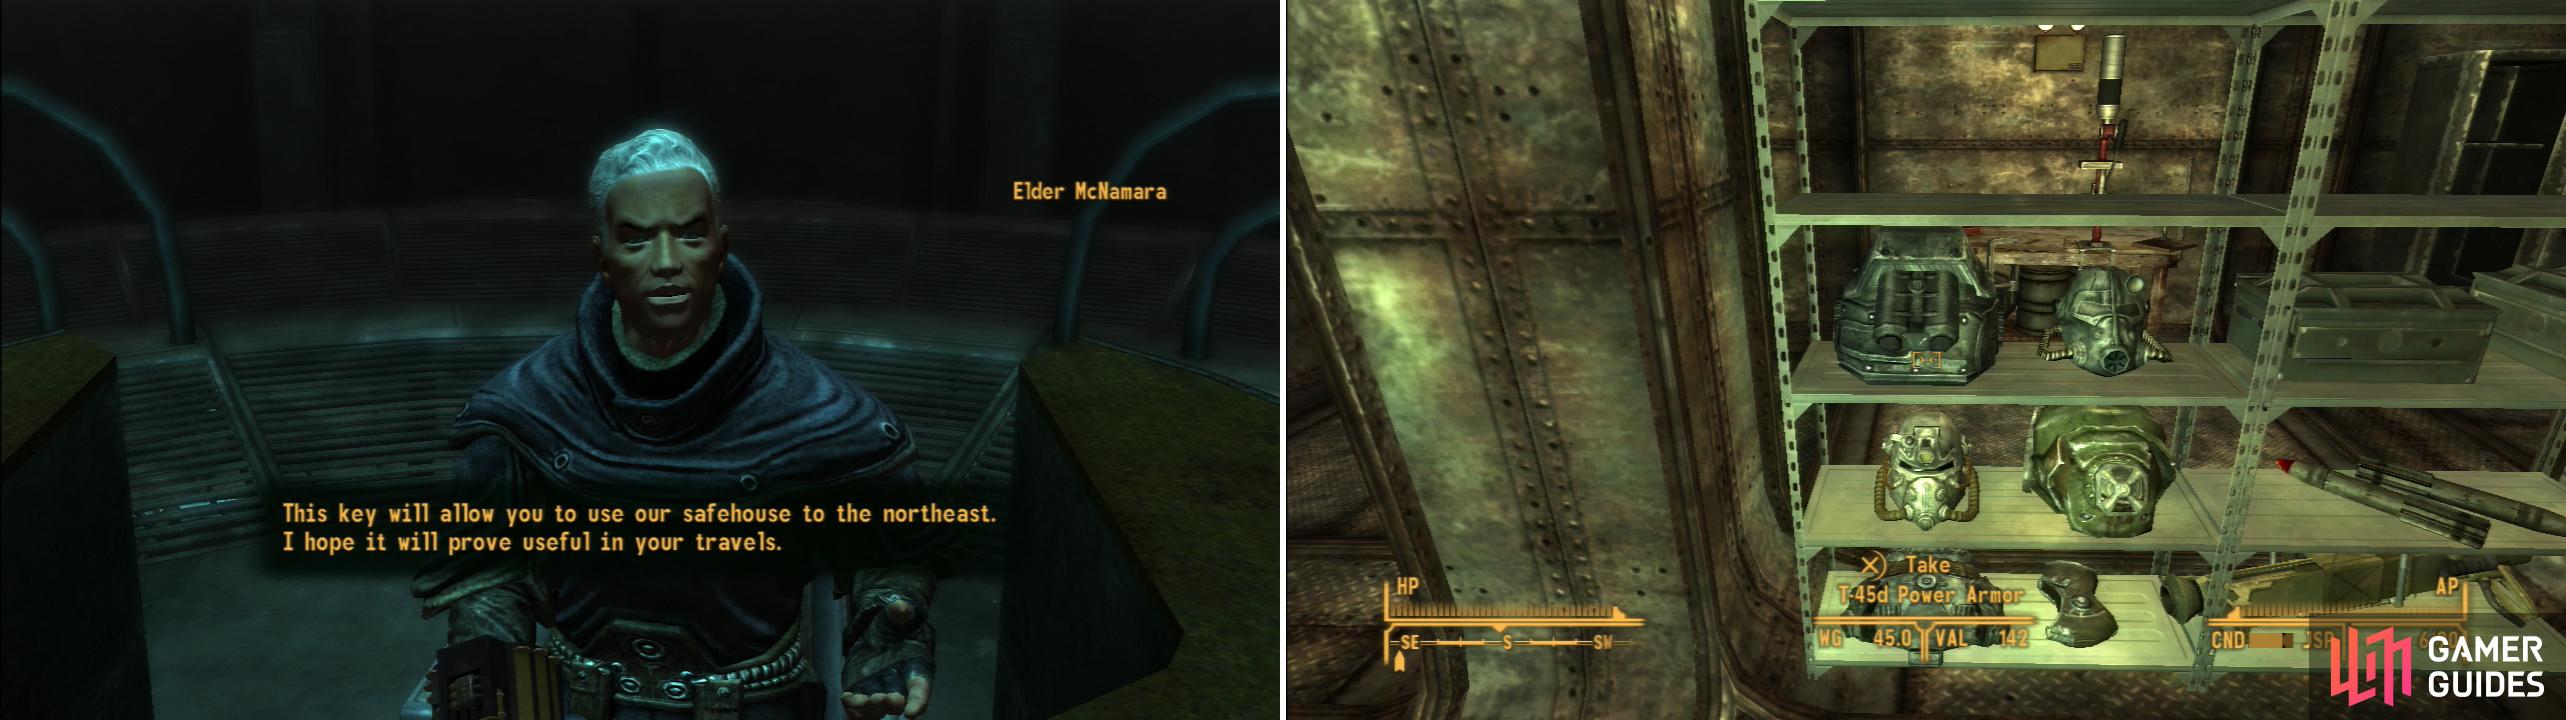 After you join the Brotherhood, talk to the Elder to get the Safehouse Key (left). Inside you’ll find a wealth of Power Armor and heavy weapons (right).